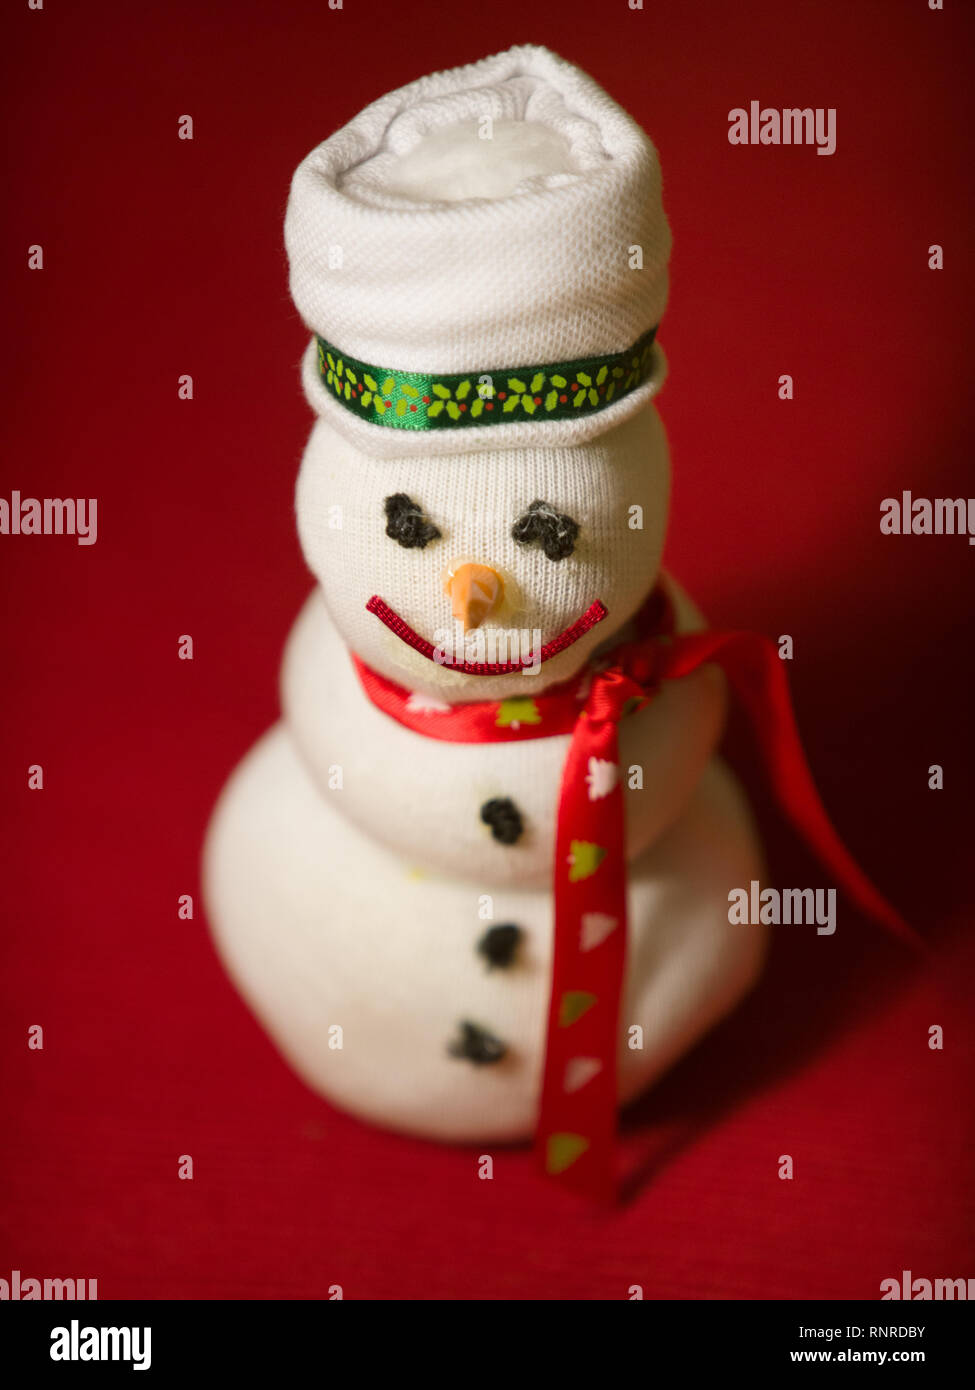 Handmade snowman doll over red Stock Photo